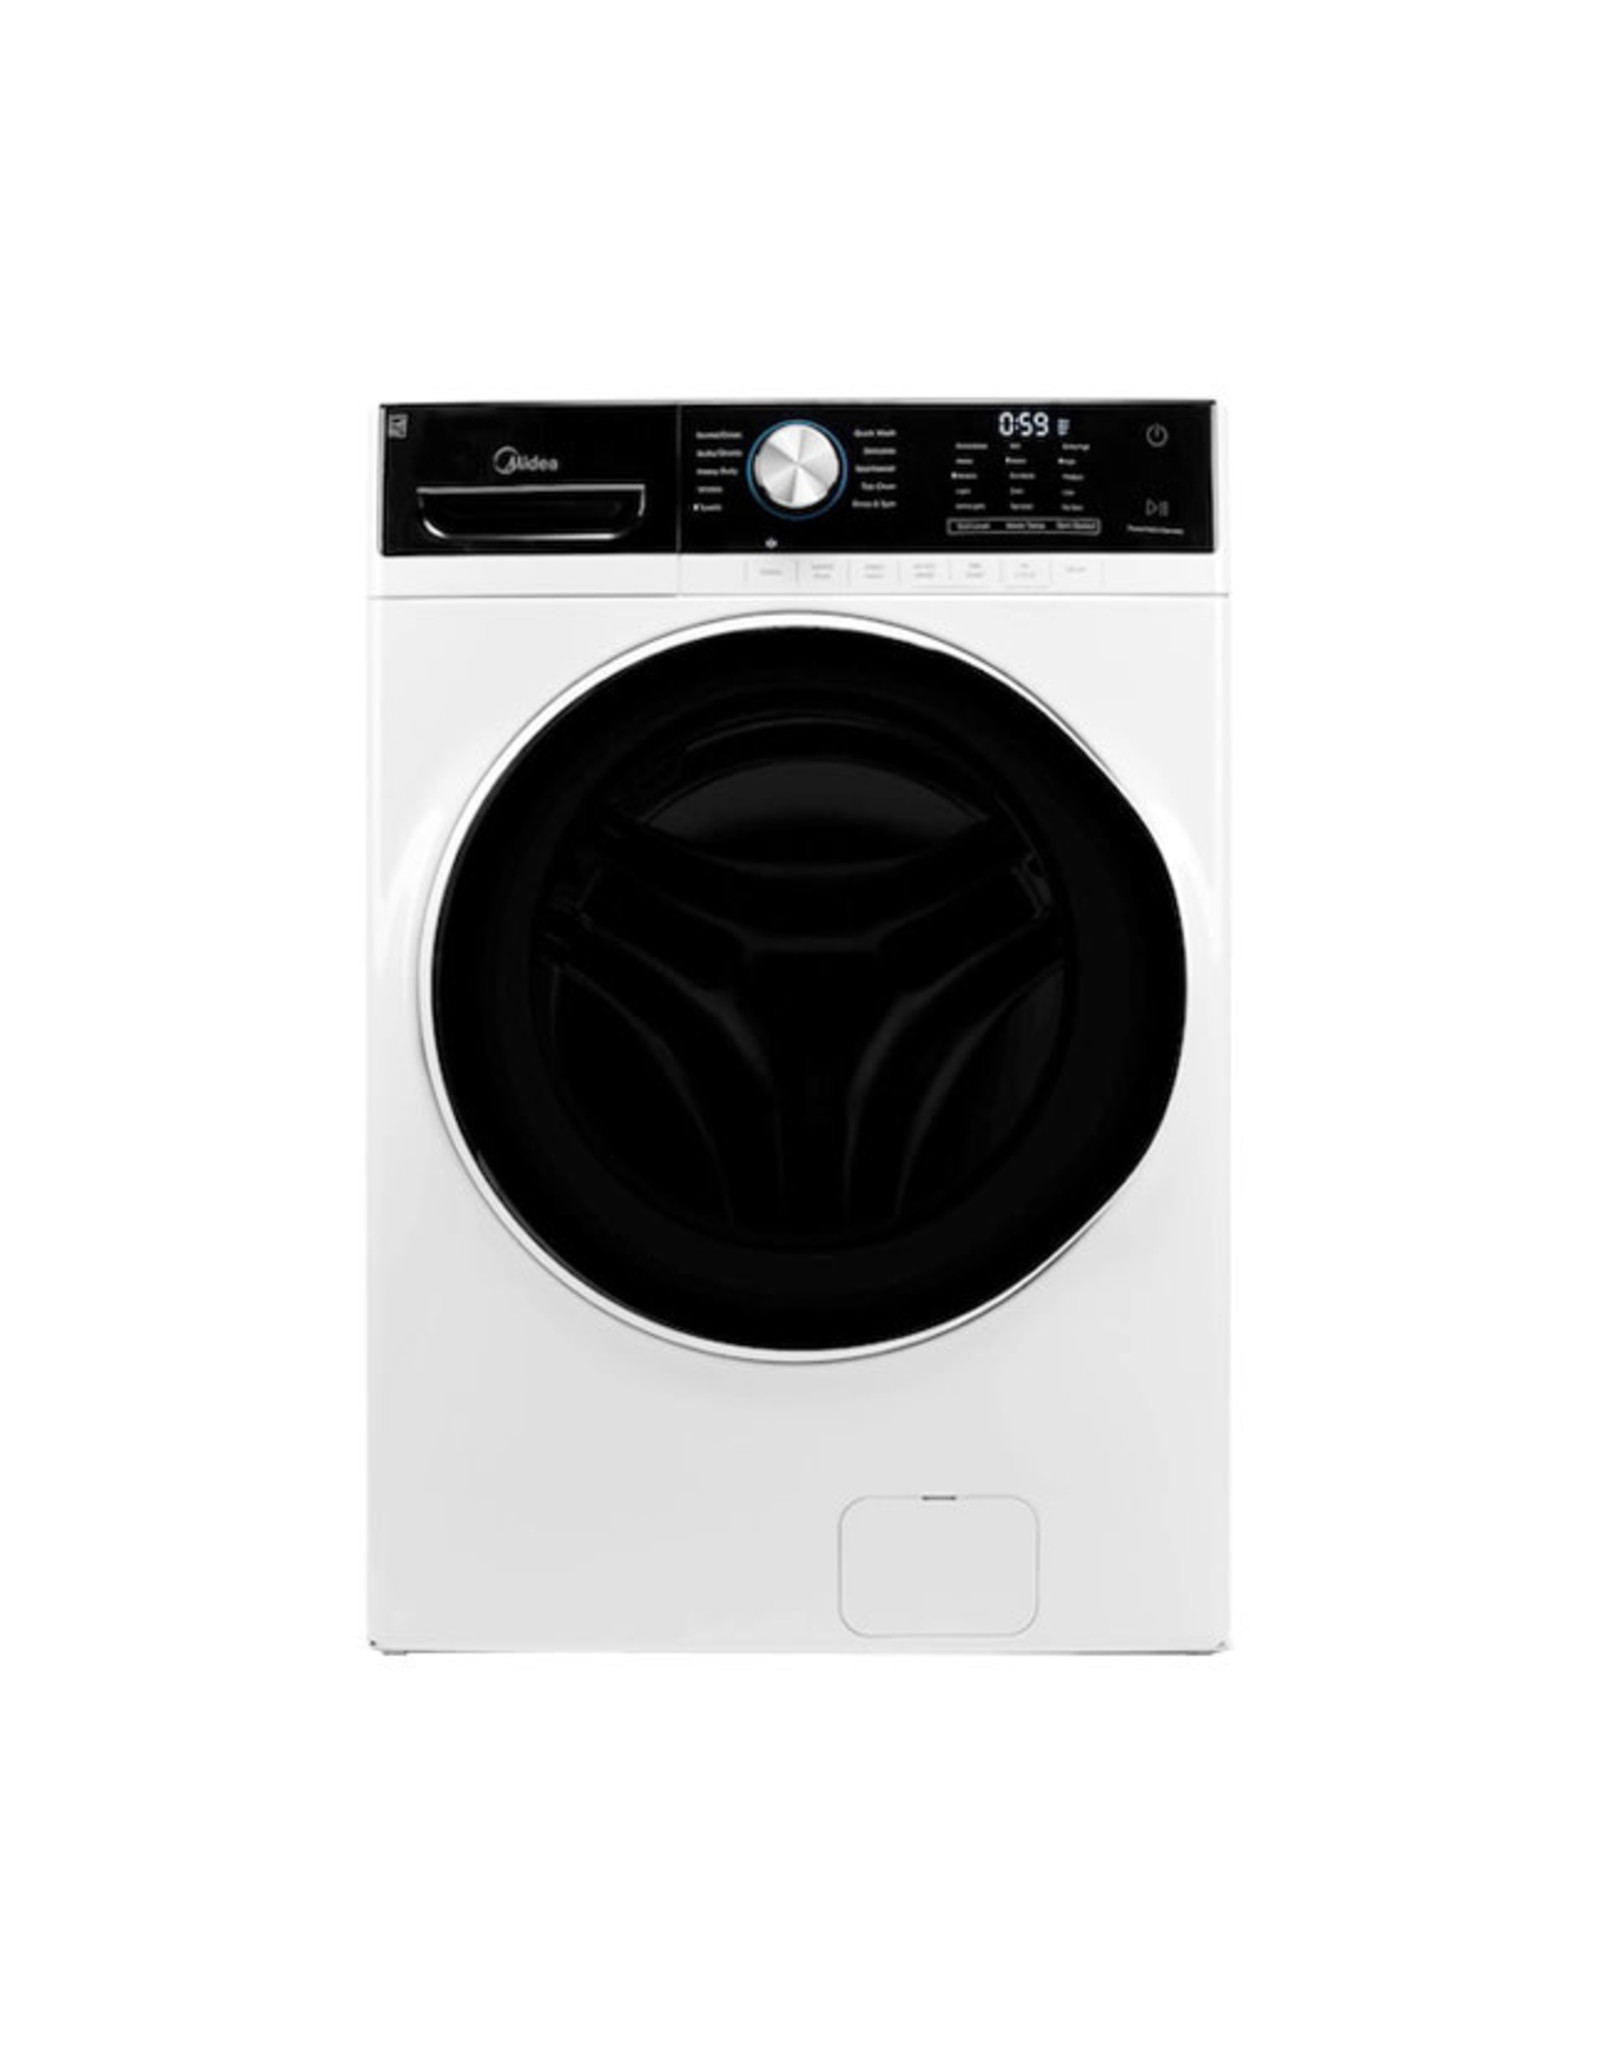 MLH45N1AWW US Midea ? Laundry ? Front Load Washers ? 4.5 Cu. Ft. Capacity Front Load Washer White